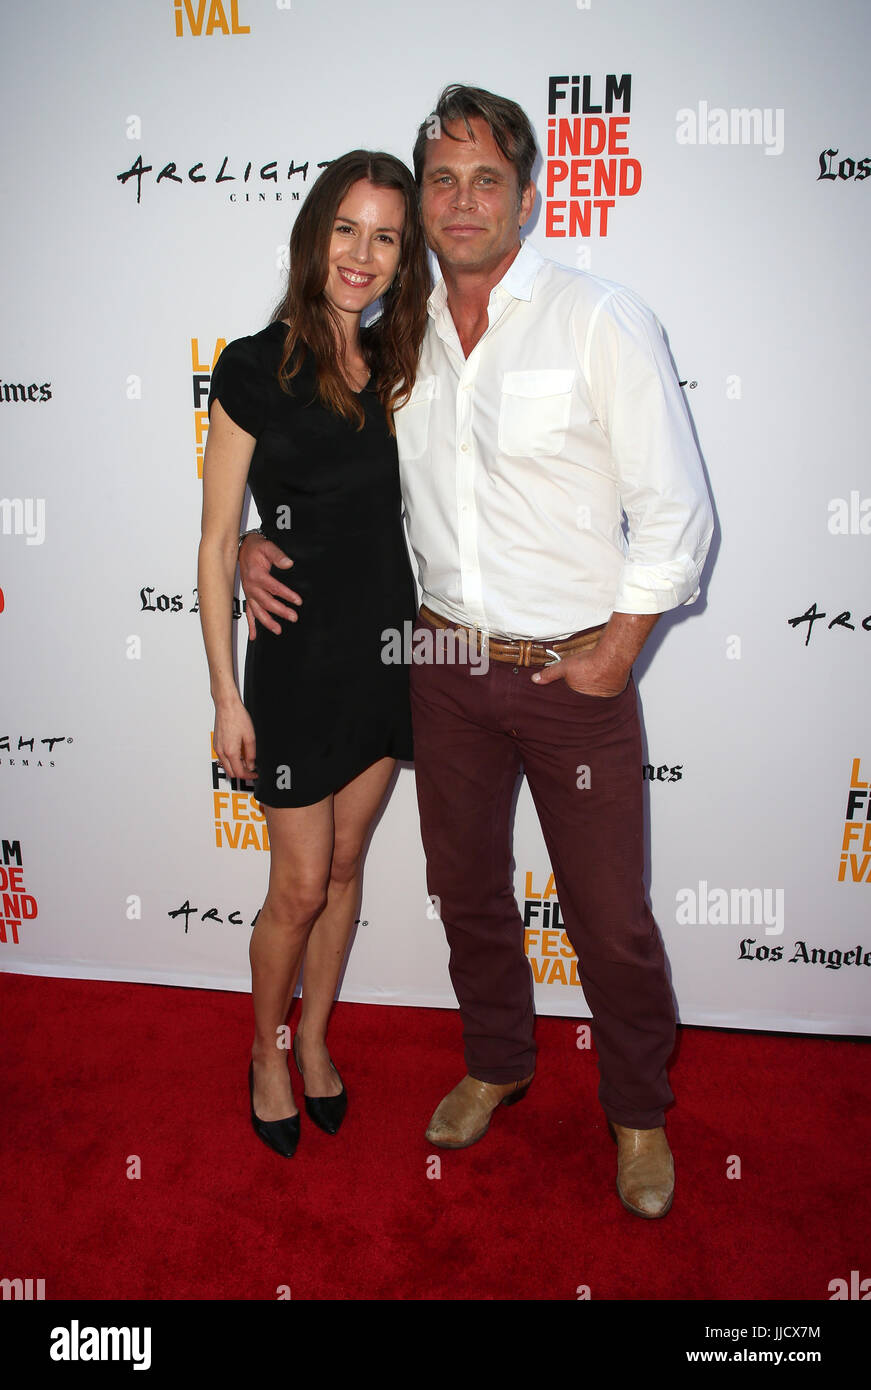 LA Film Festival - Gala Screening World Premiere of Saban Films’ 'Shot Caller' - Arrivals  Featuring: Chris Browning, Guest Where: Culver City, California, United States When: 18 Jun 2017 Credit: FayesVision/WENN.com Stock Photo